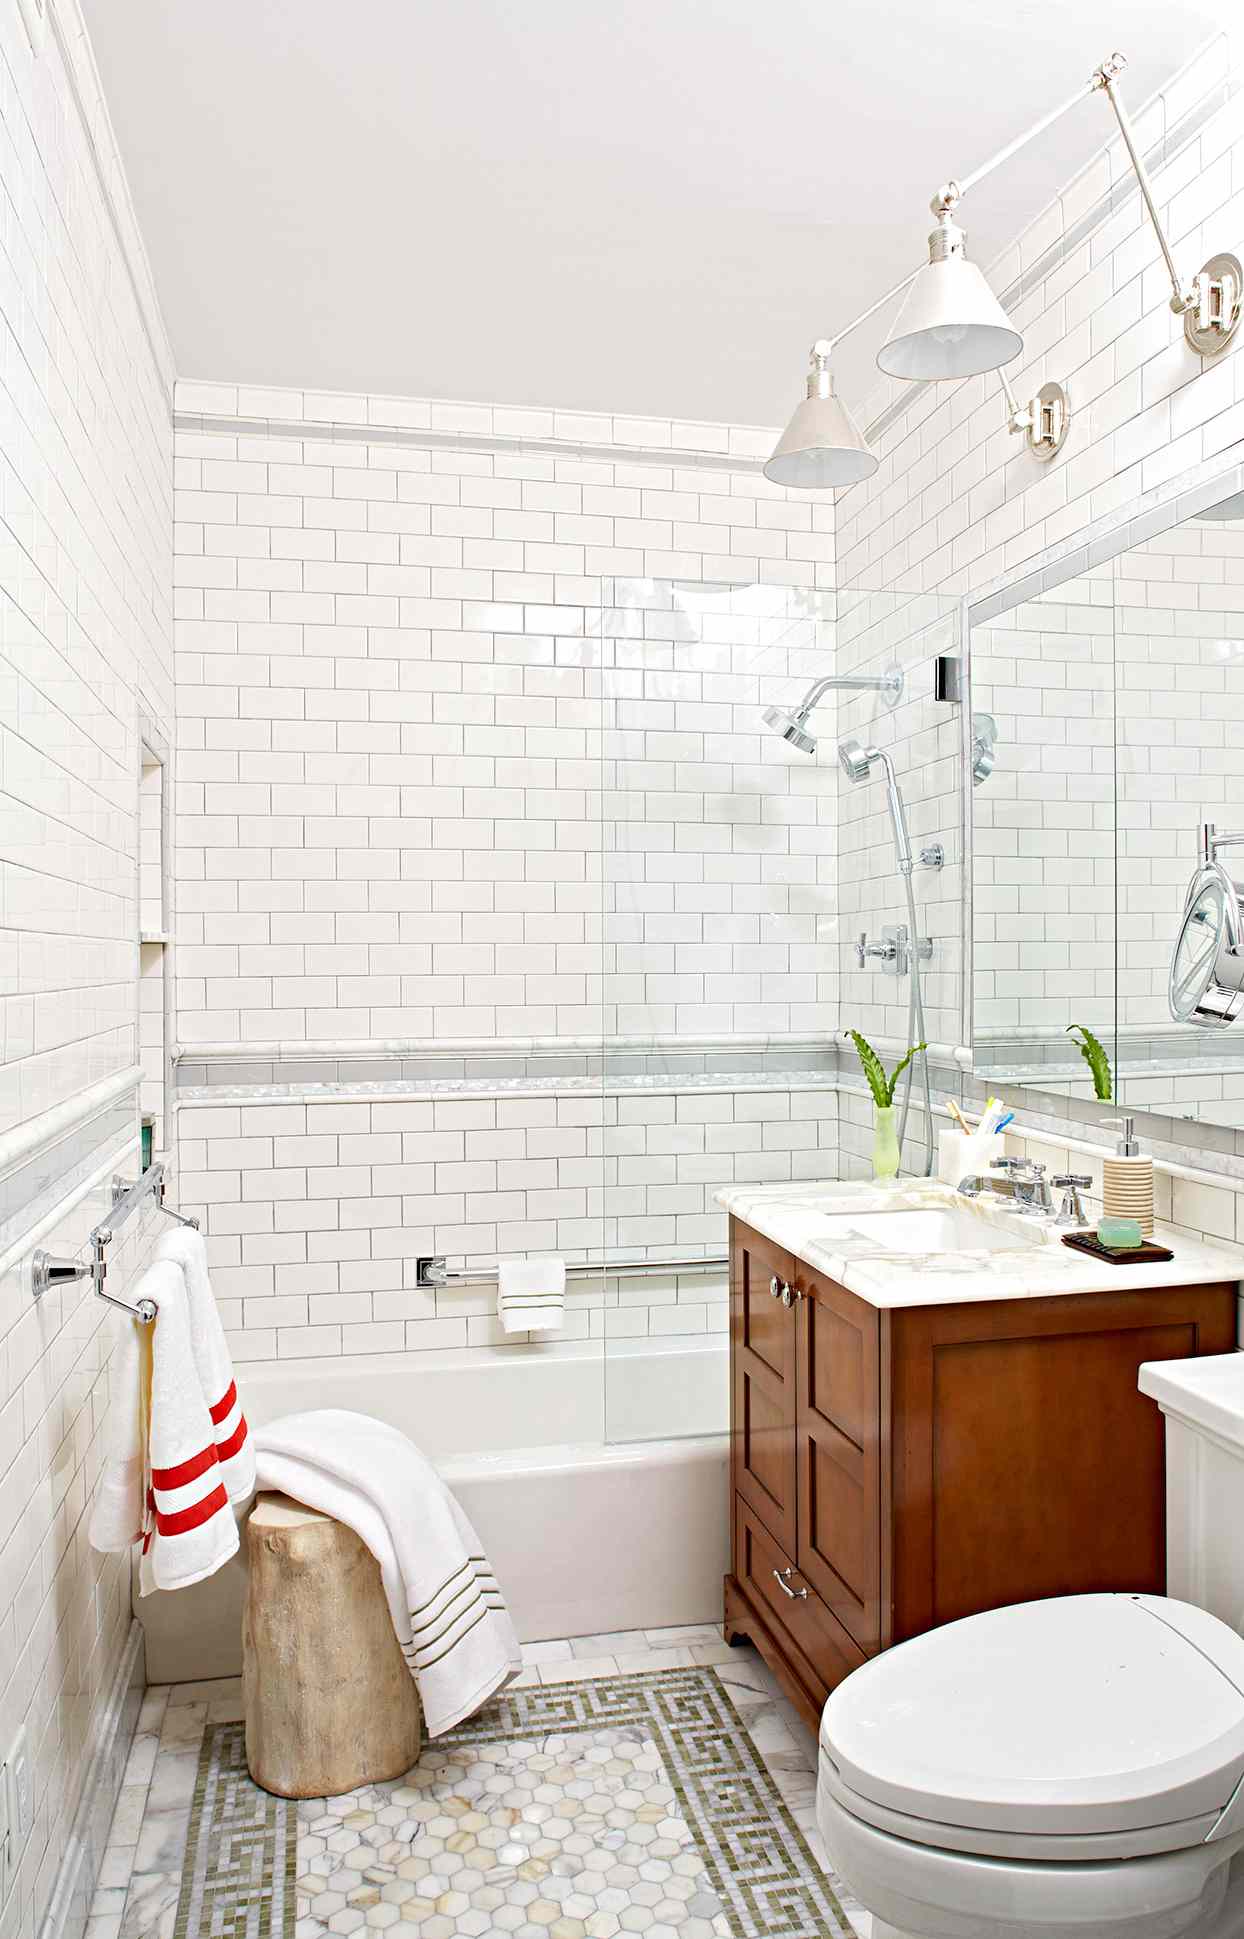 Tile A Shower Enclosure Or Tub Surround, How To Install Ceramic Wall Tile Around A Bathtub